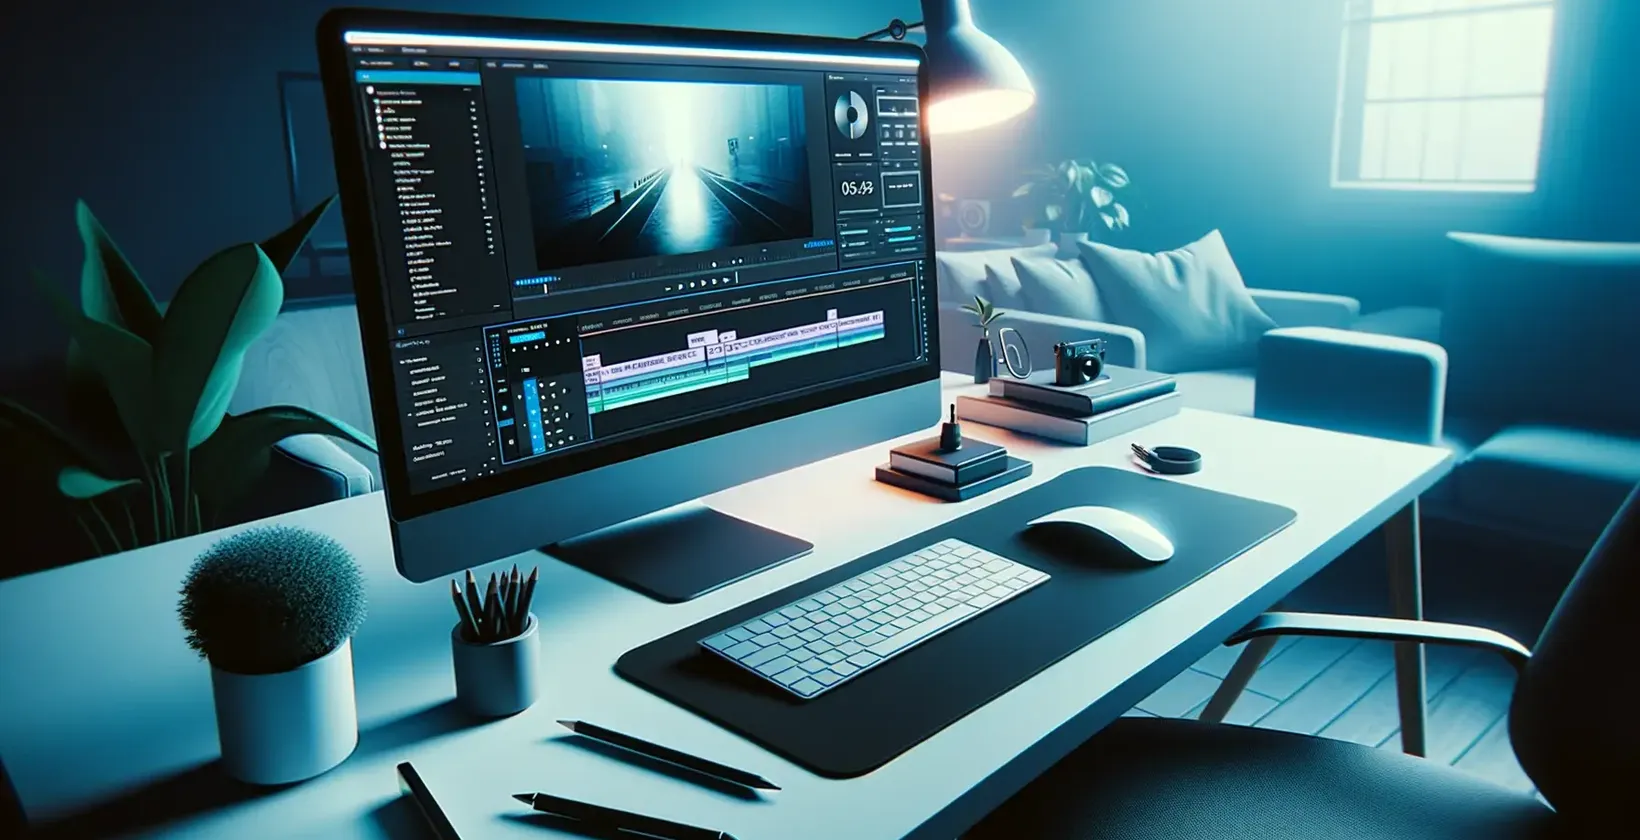 Add text to video with Adobe After Effects illustrated by a sleek editing workspace with blue light